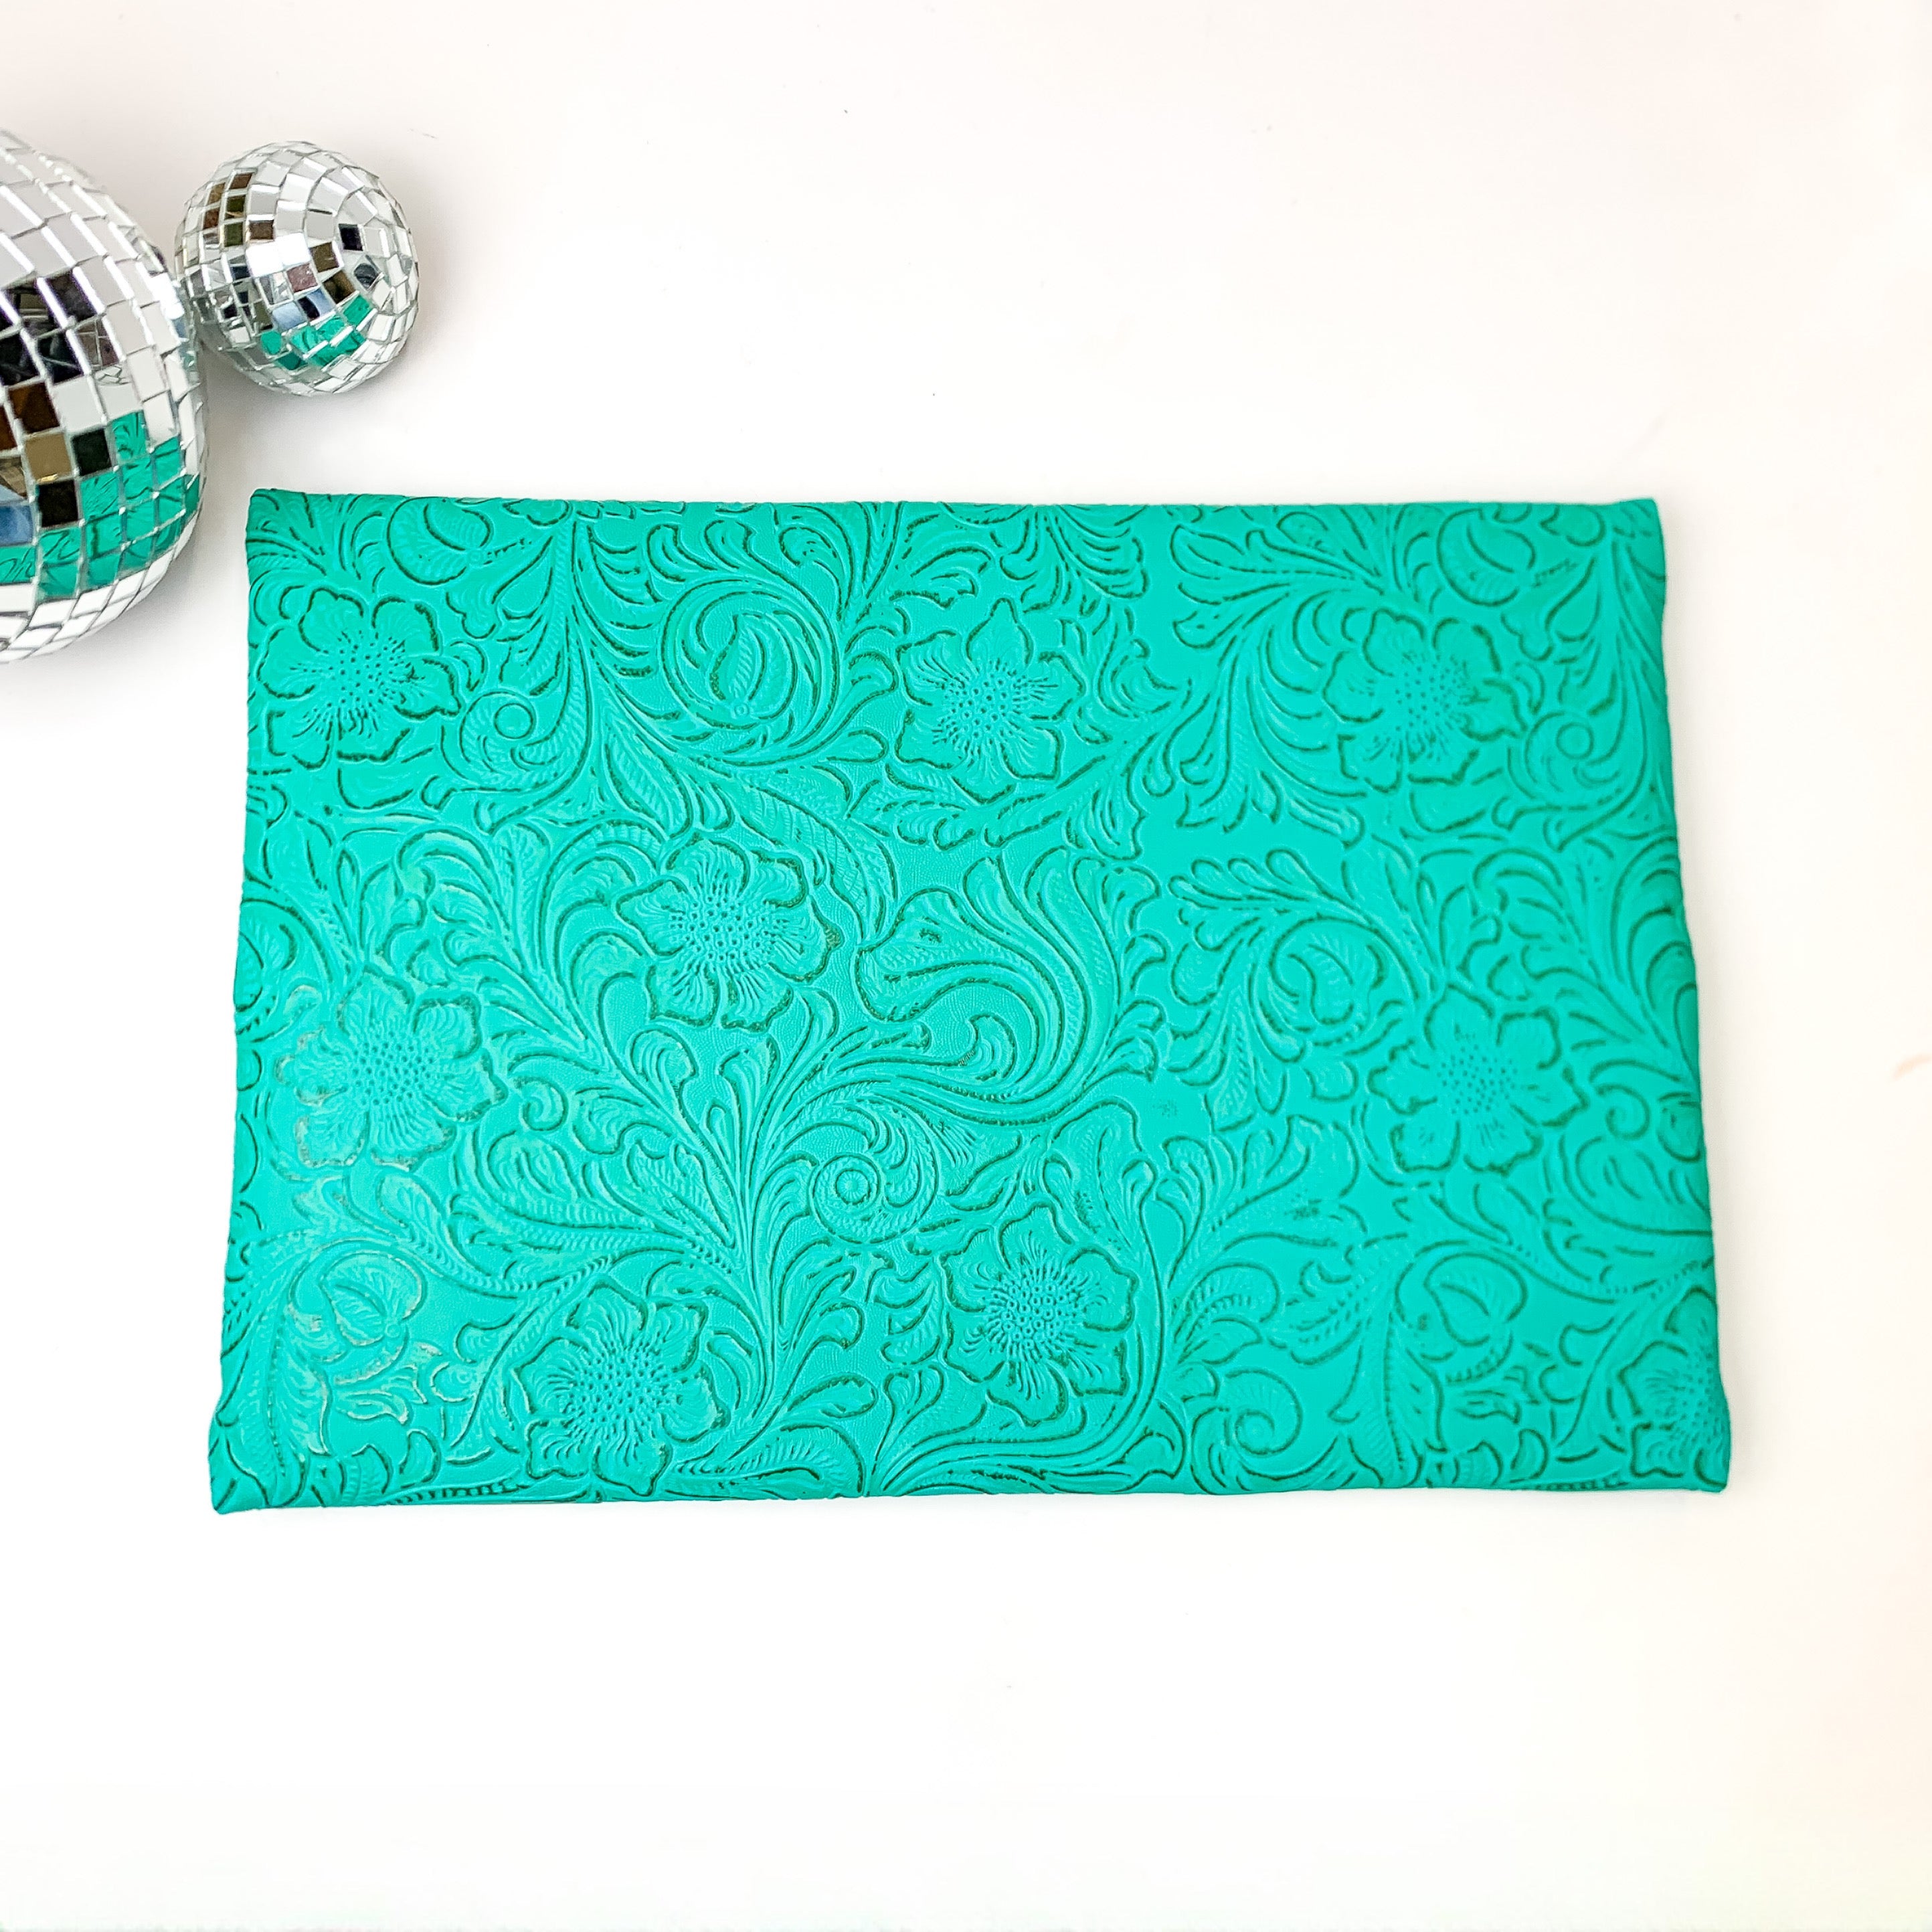 Makeup Junkie | Medium Turquoise Dream Lay Flat Bag in Turquoise Green Tooled Print